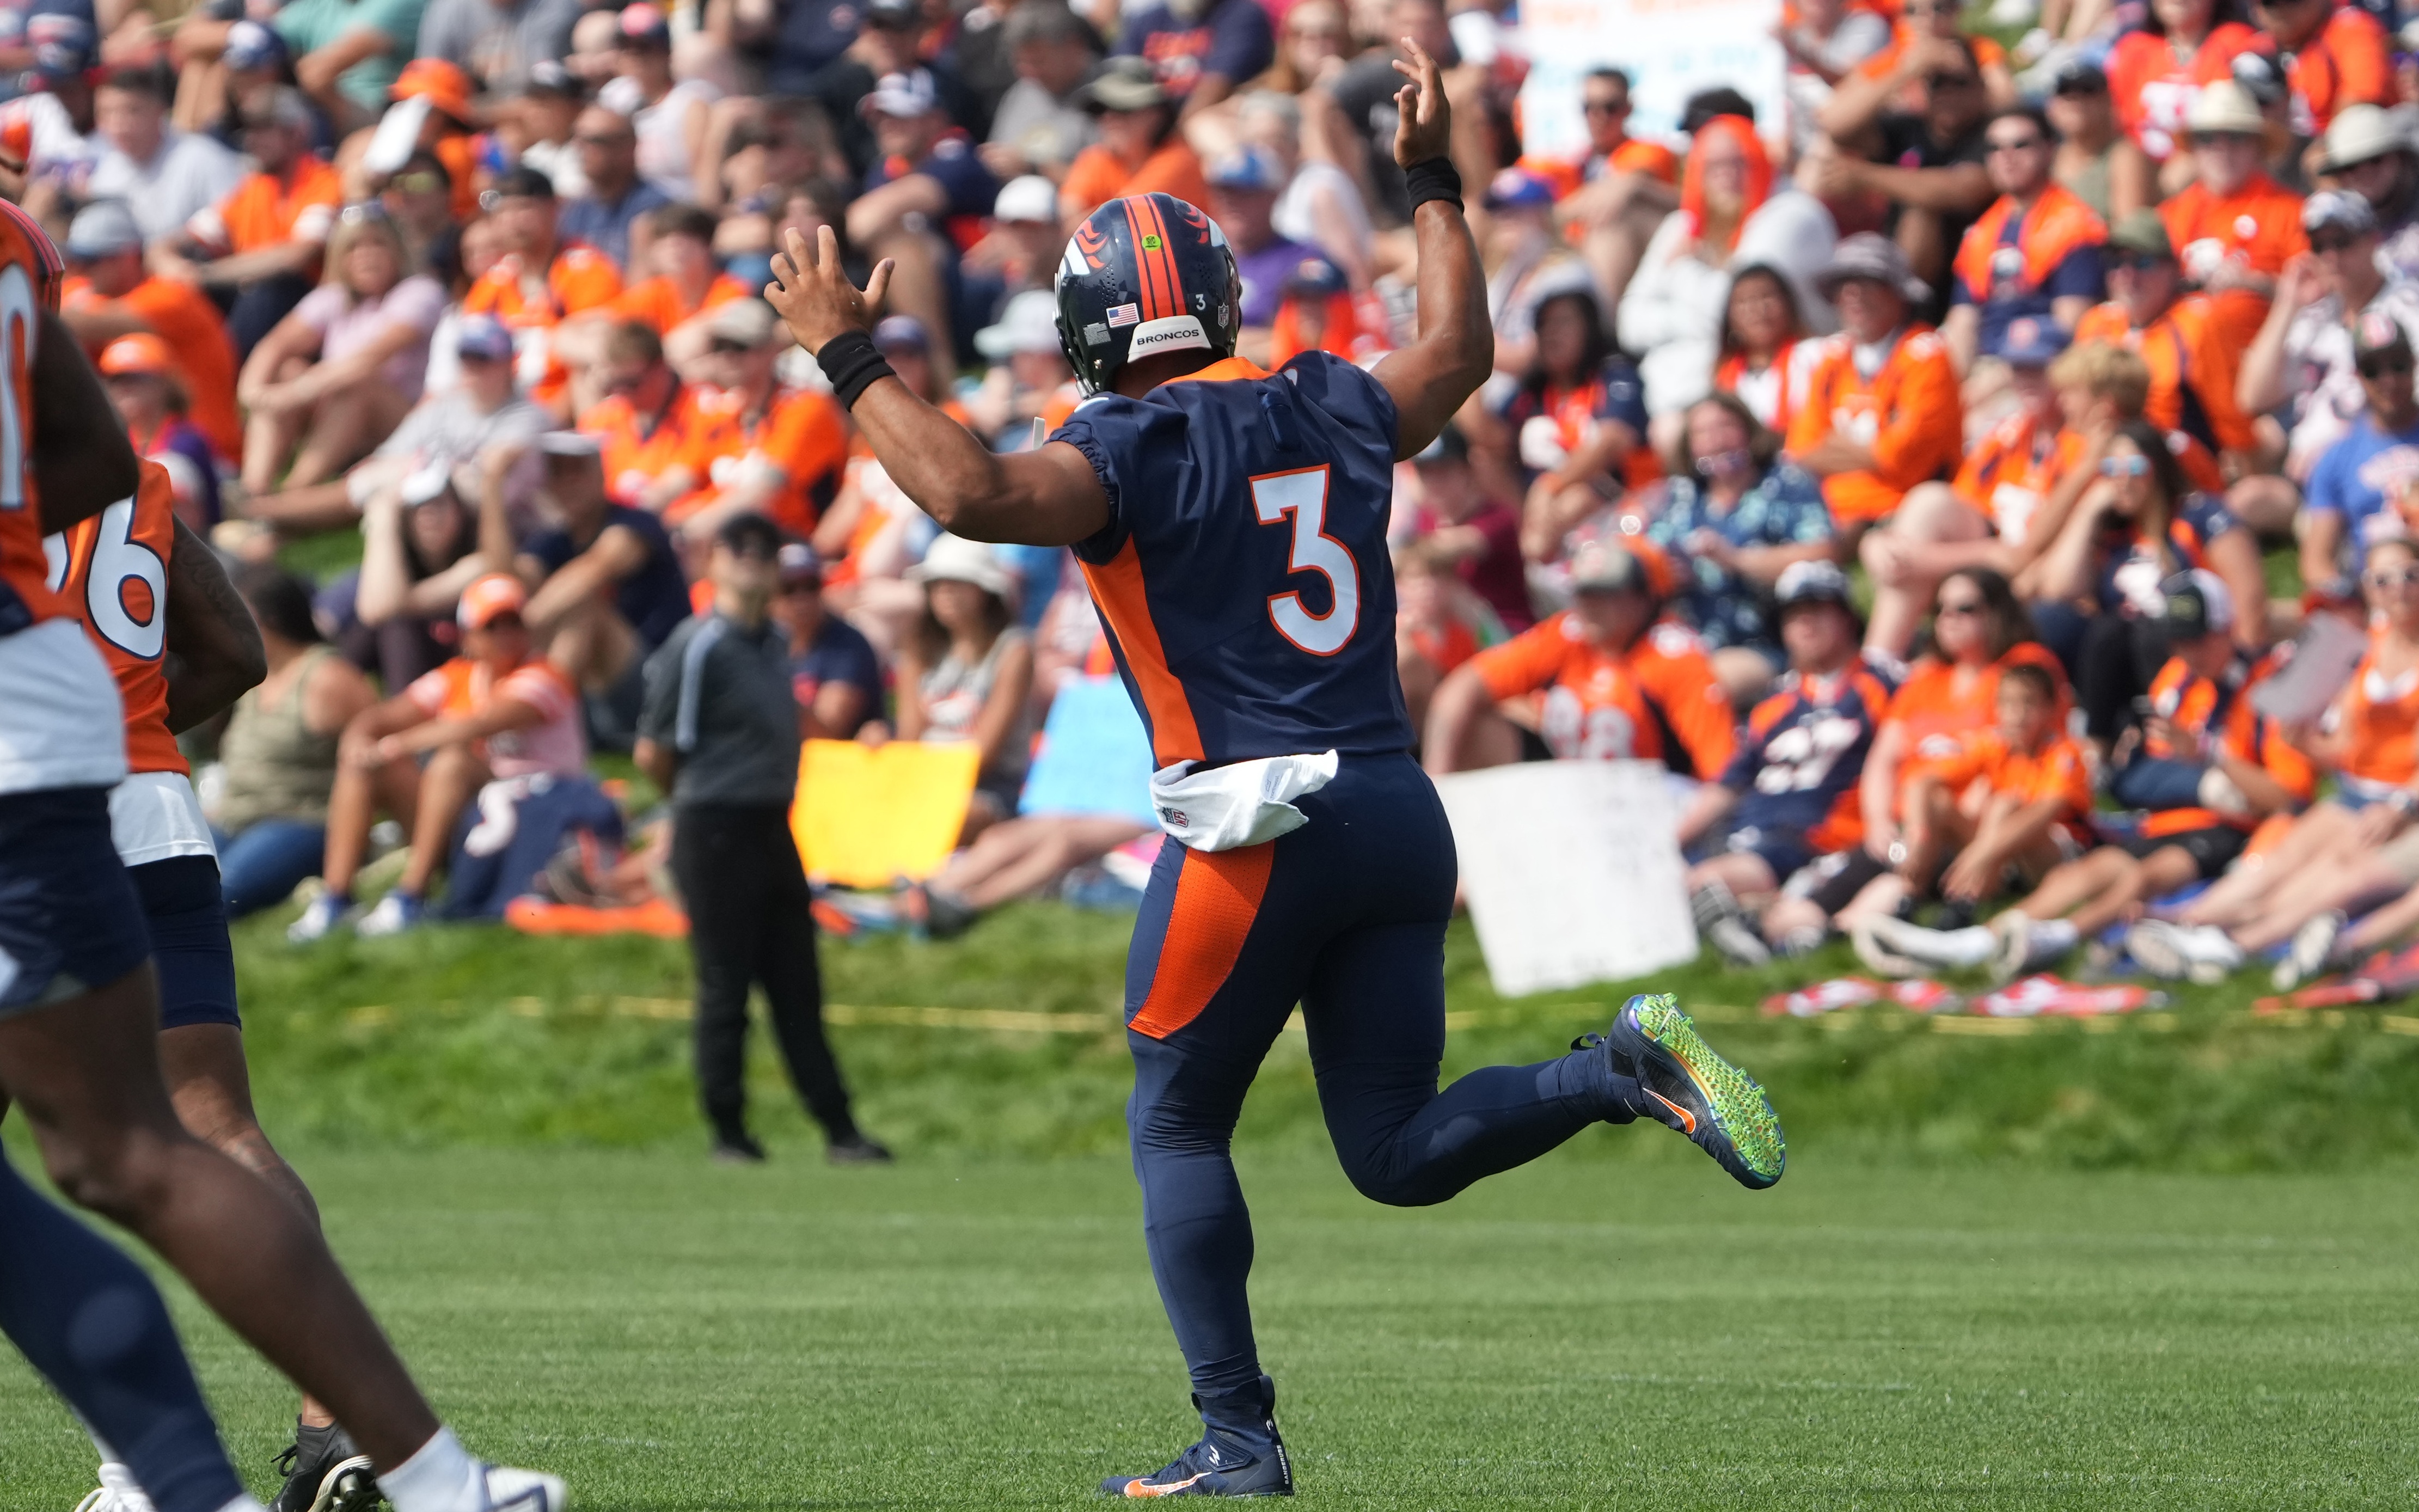 Russell Wilson lighting it up at Denver Broncos training camp. Credit: Ron Chenoy, USA TODAY Sports.